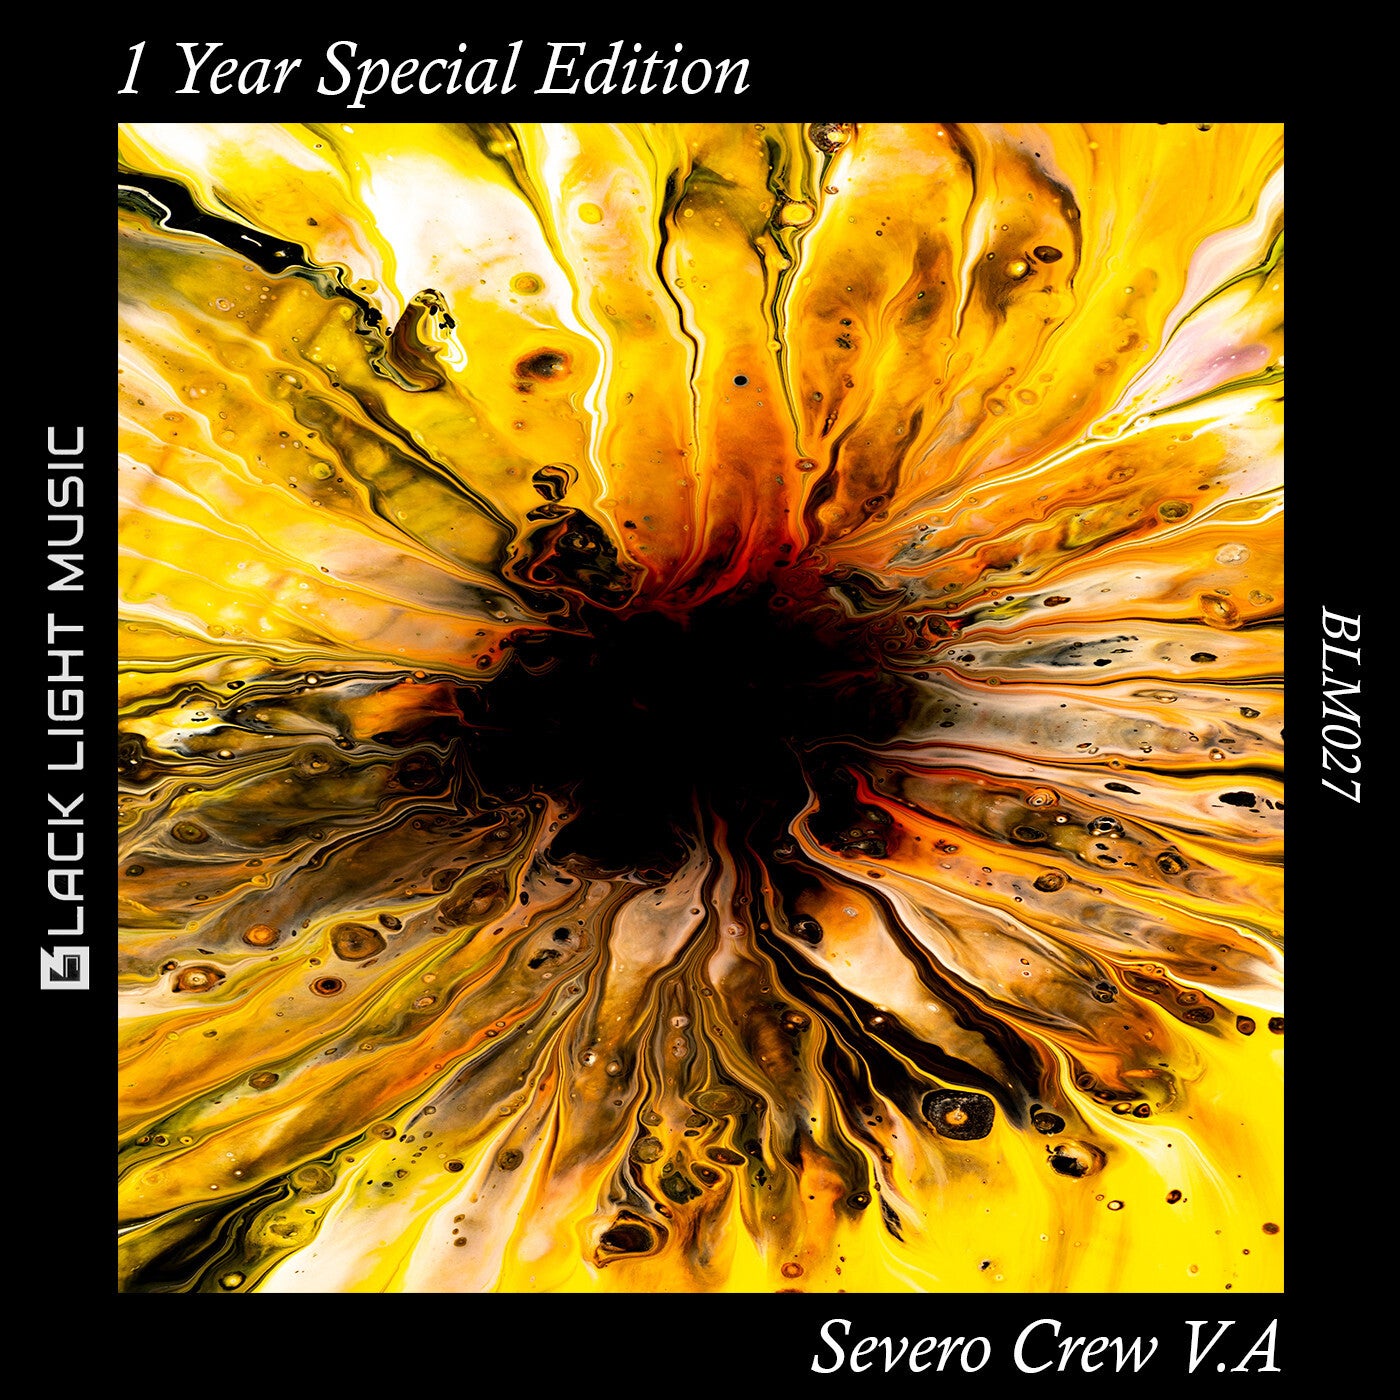 1 Year Special Edition x Severo Crew V.A